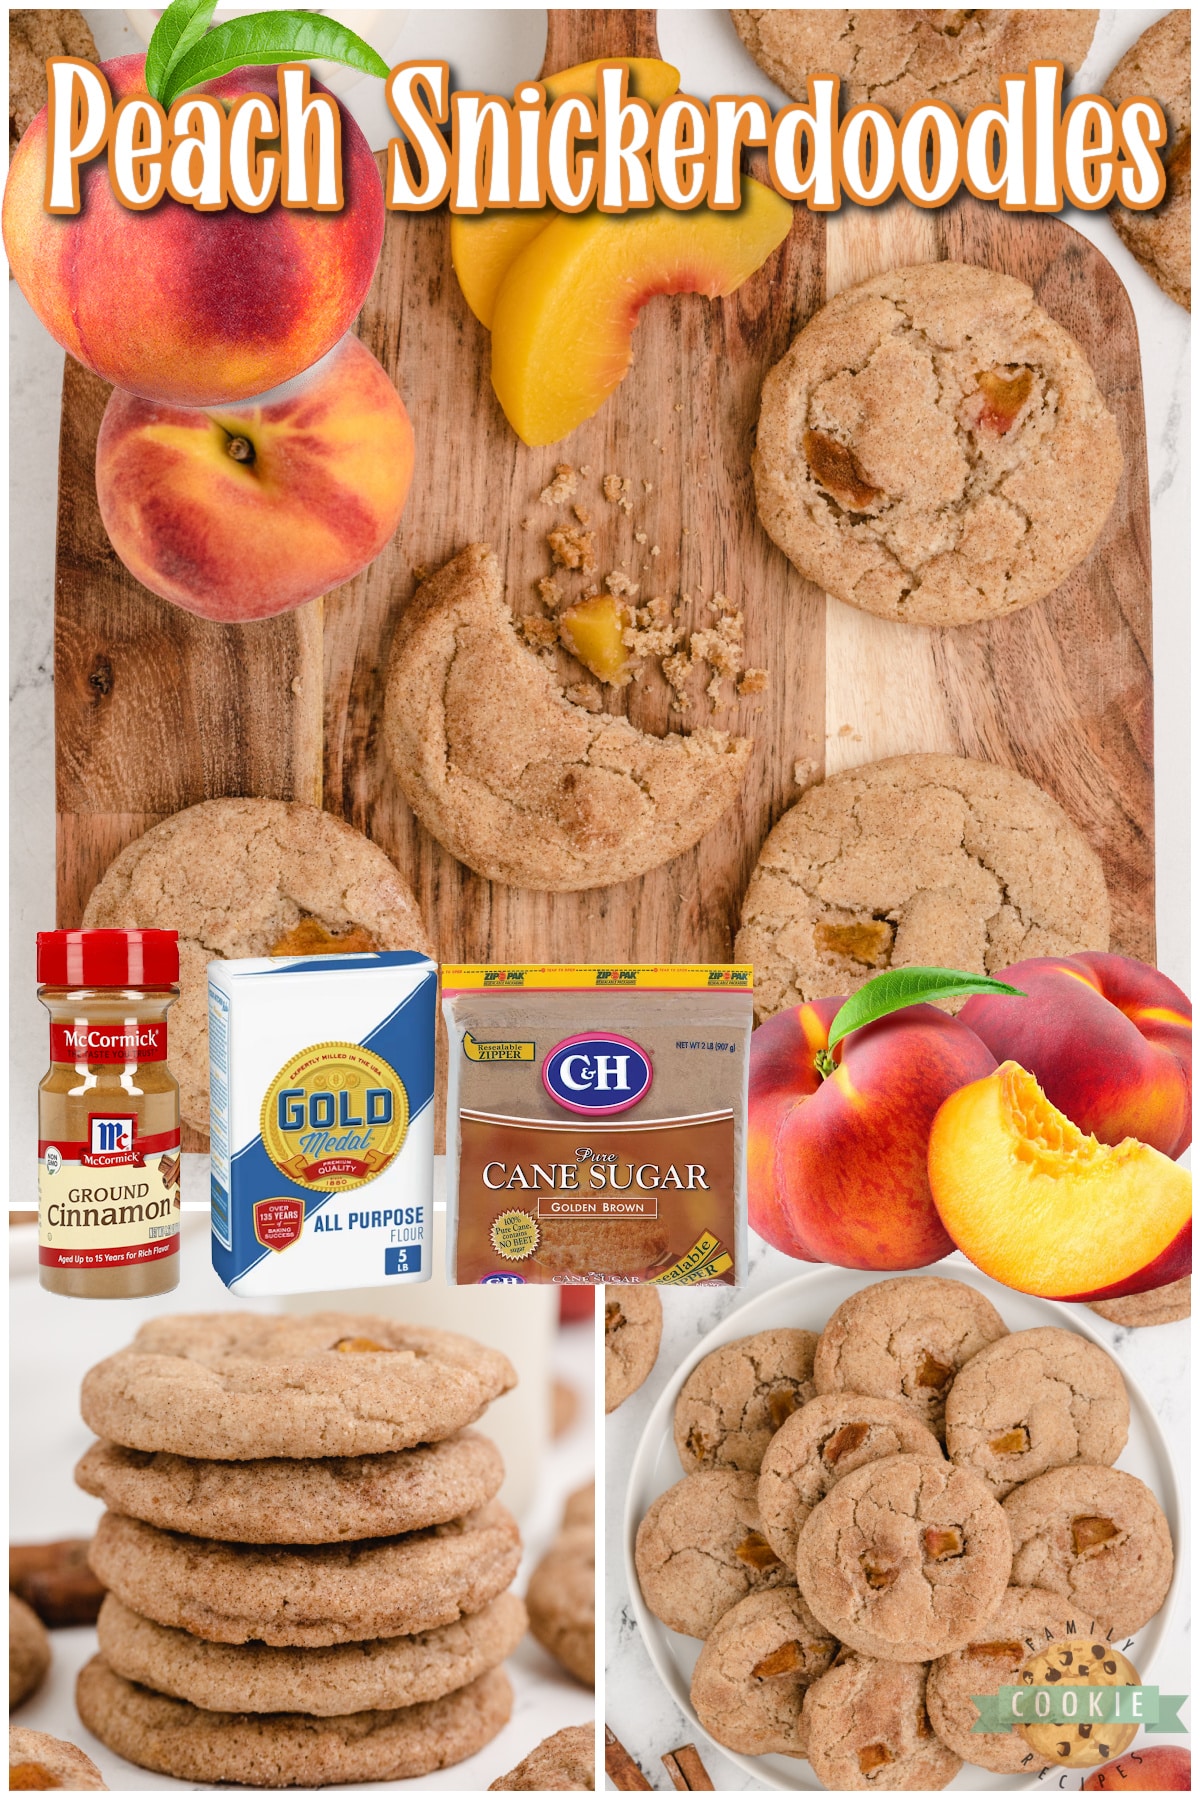 Peach Snickerdoodle Cookies are soft, chewy, delicious and the addition of fresh peaches makes these cinnamon sugar cookies even better!